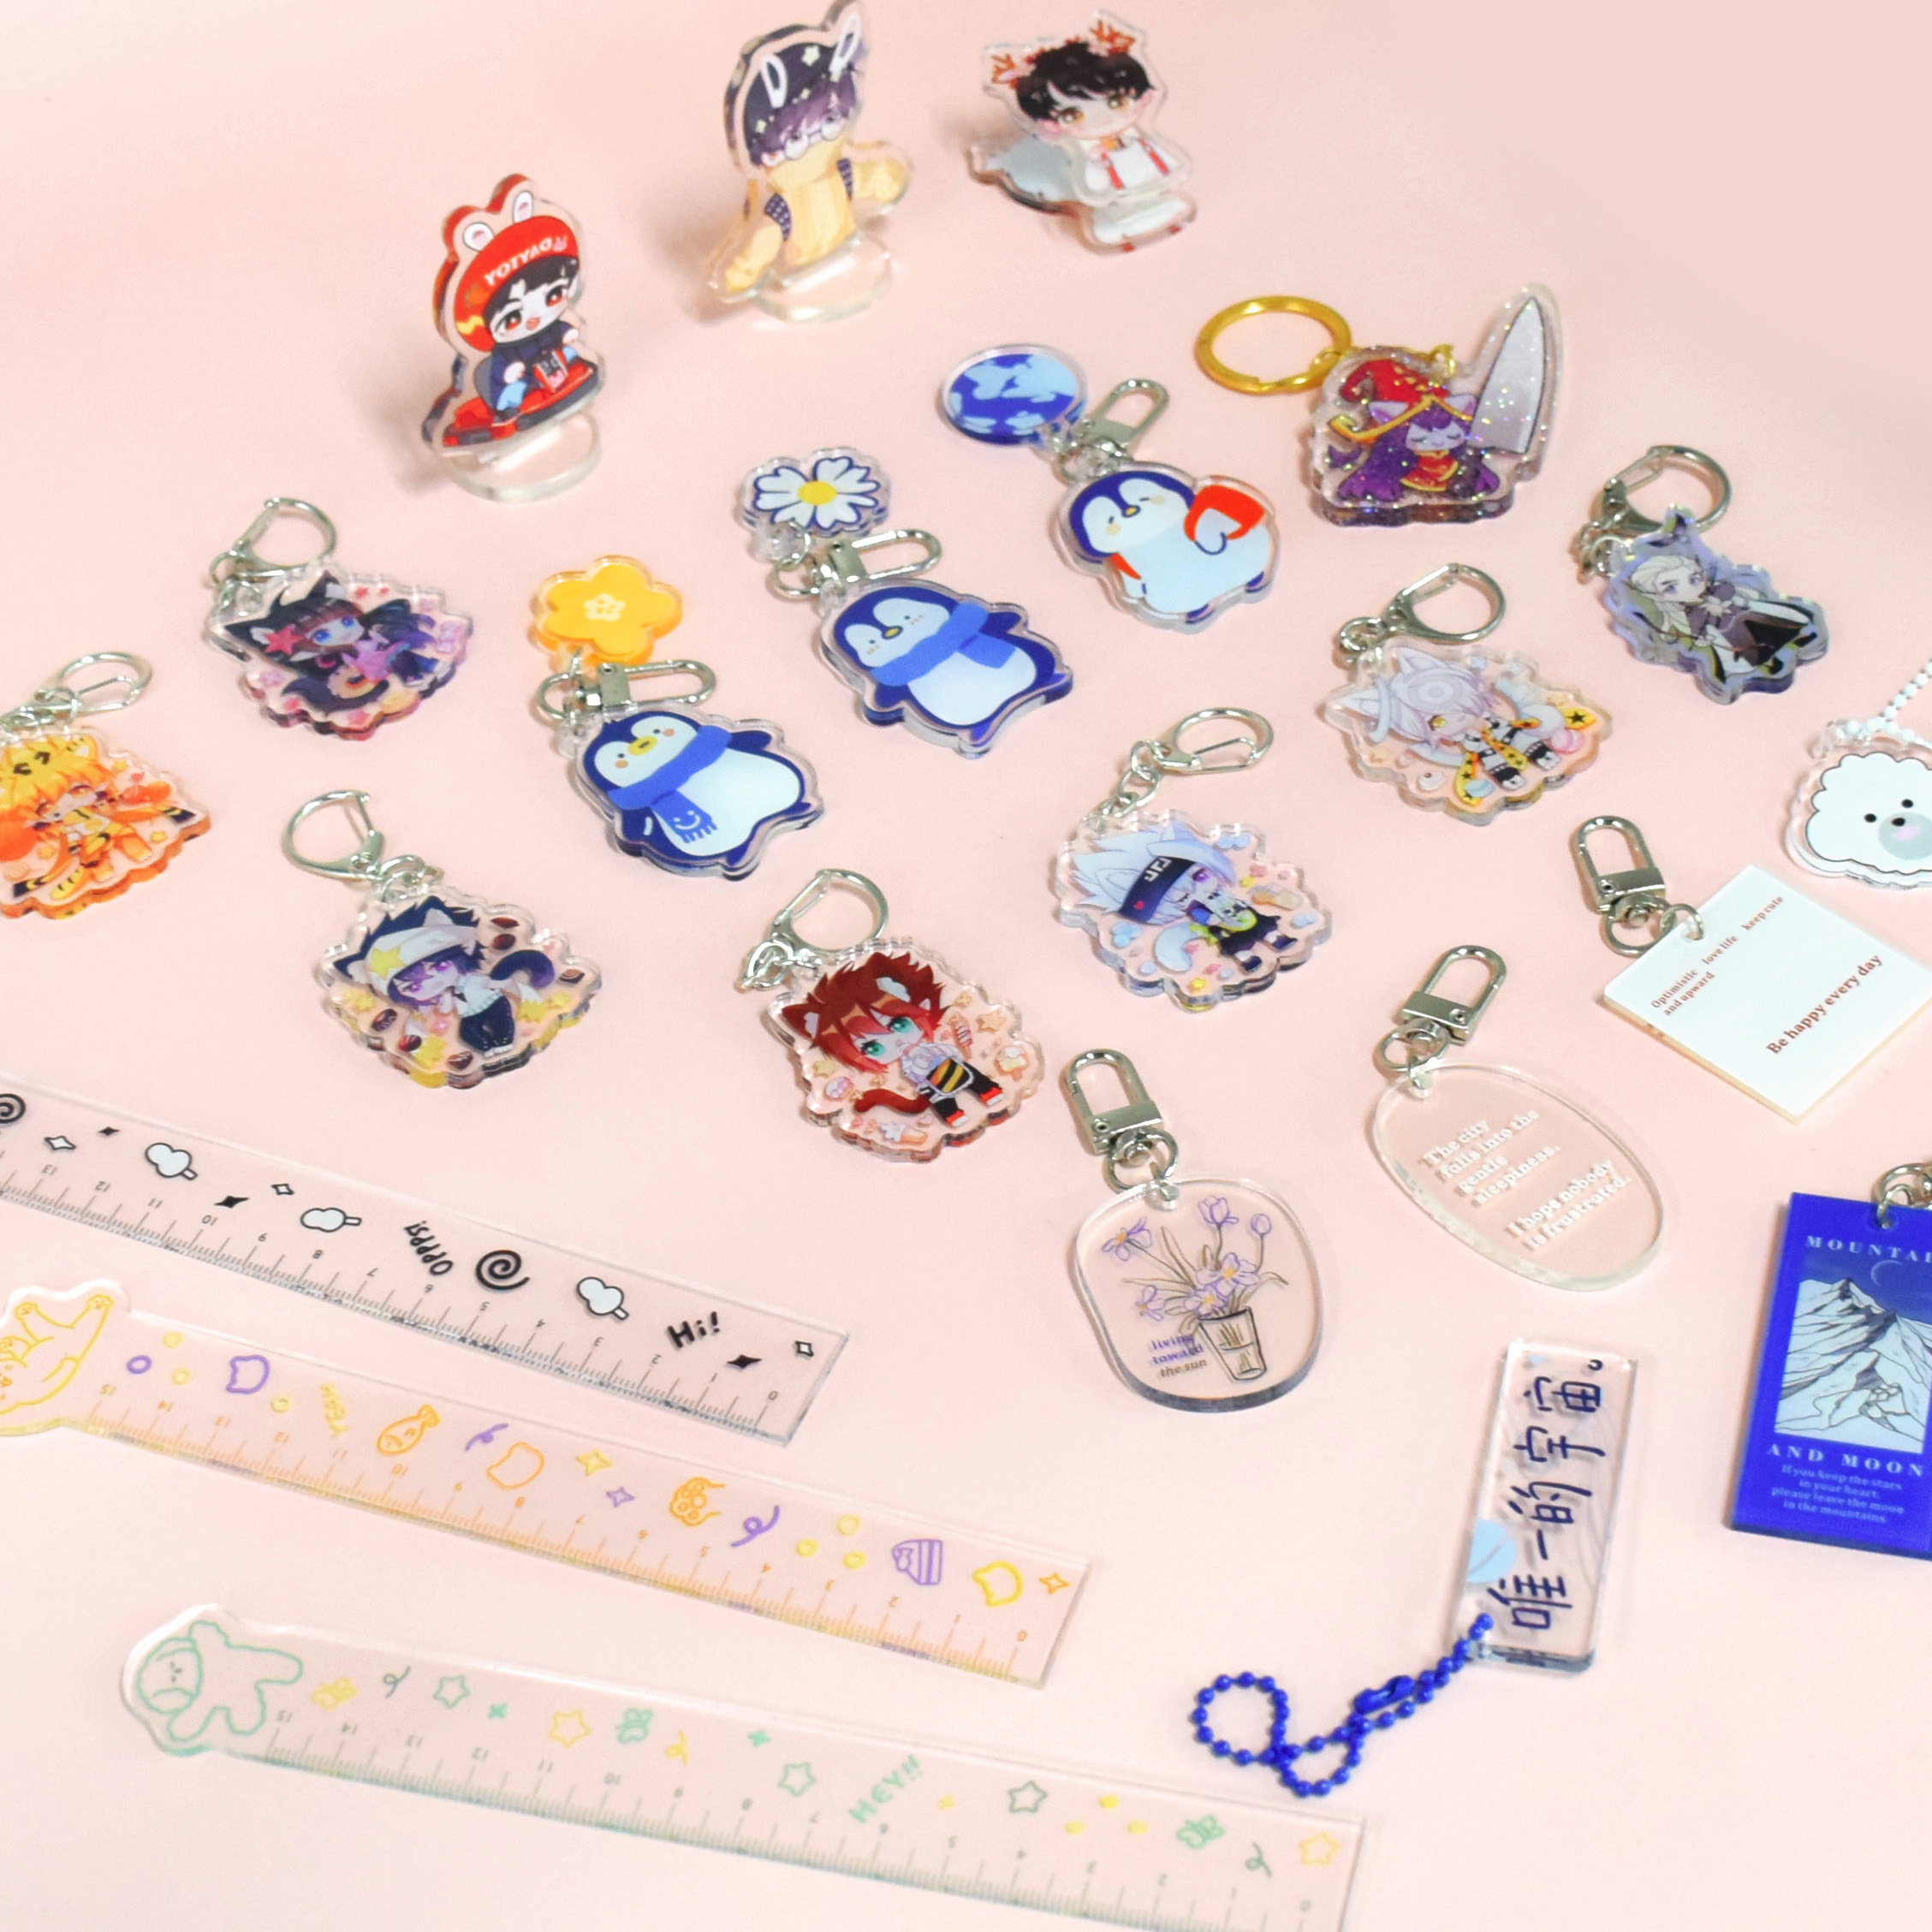 A wide range of acrylic items